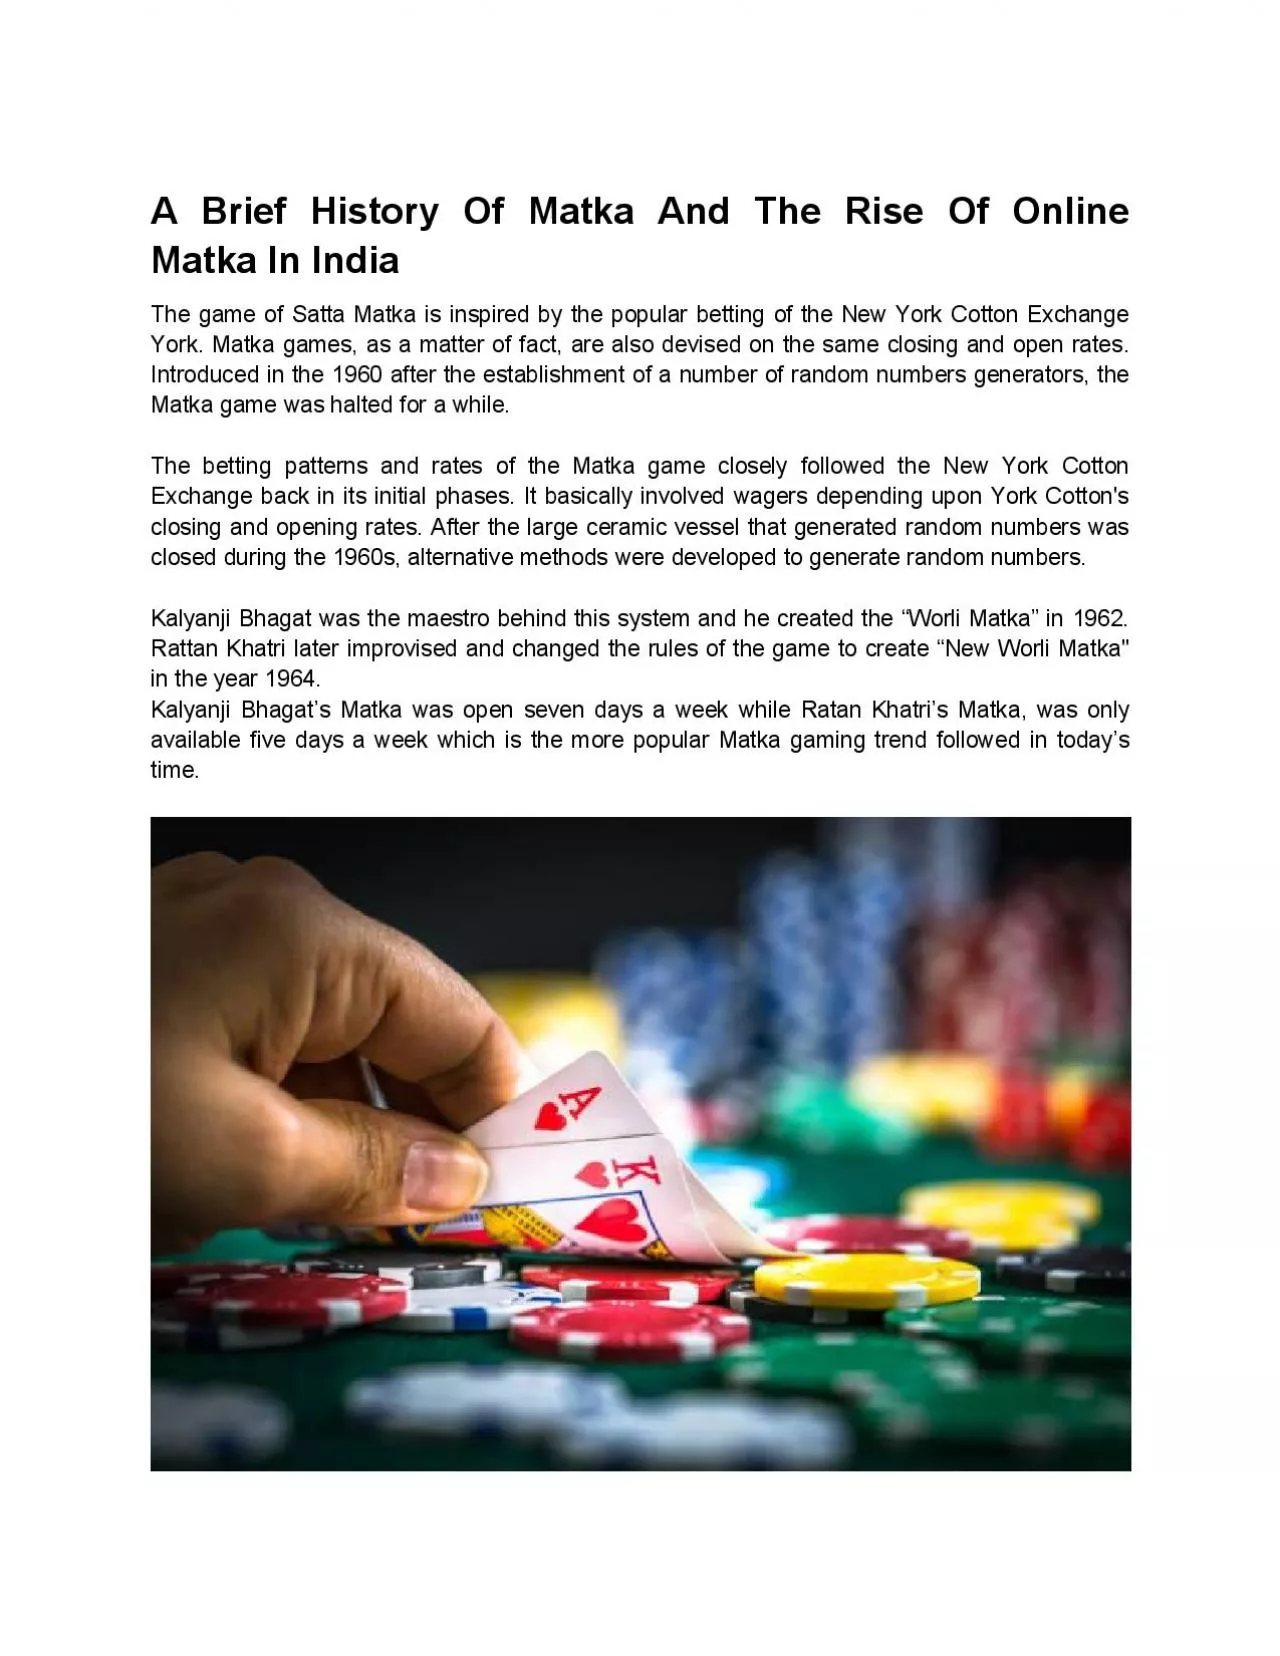 A Brief History Of Matka And The Rise Of Online Matka In India